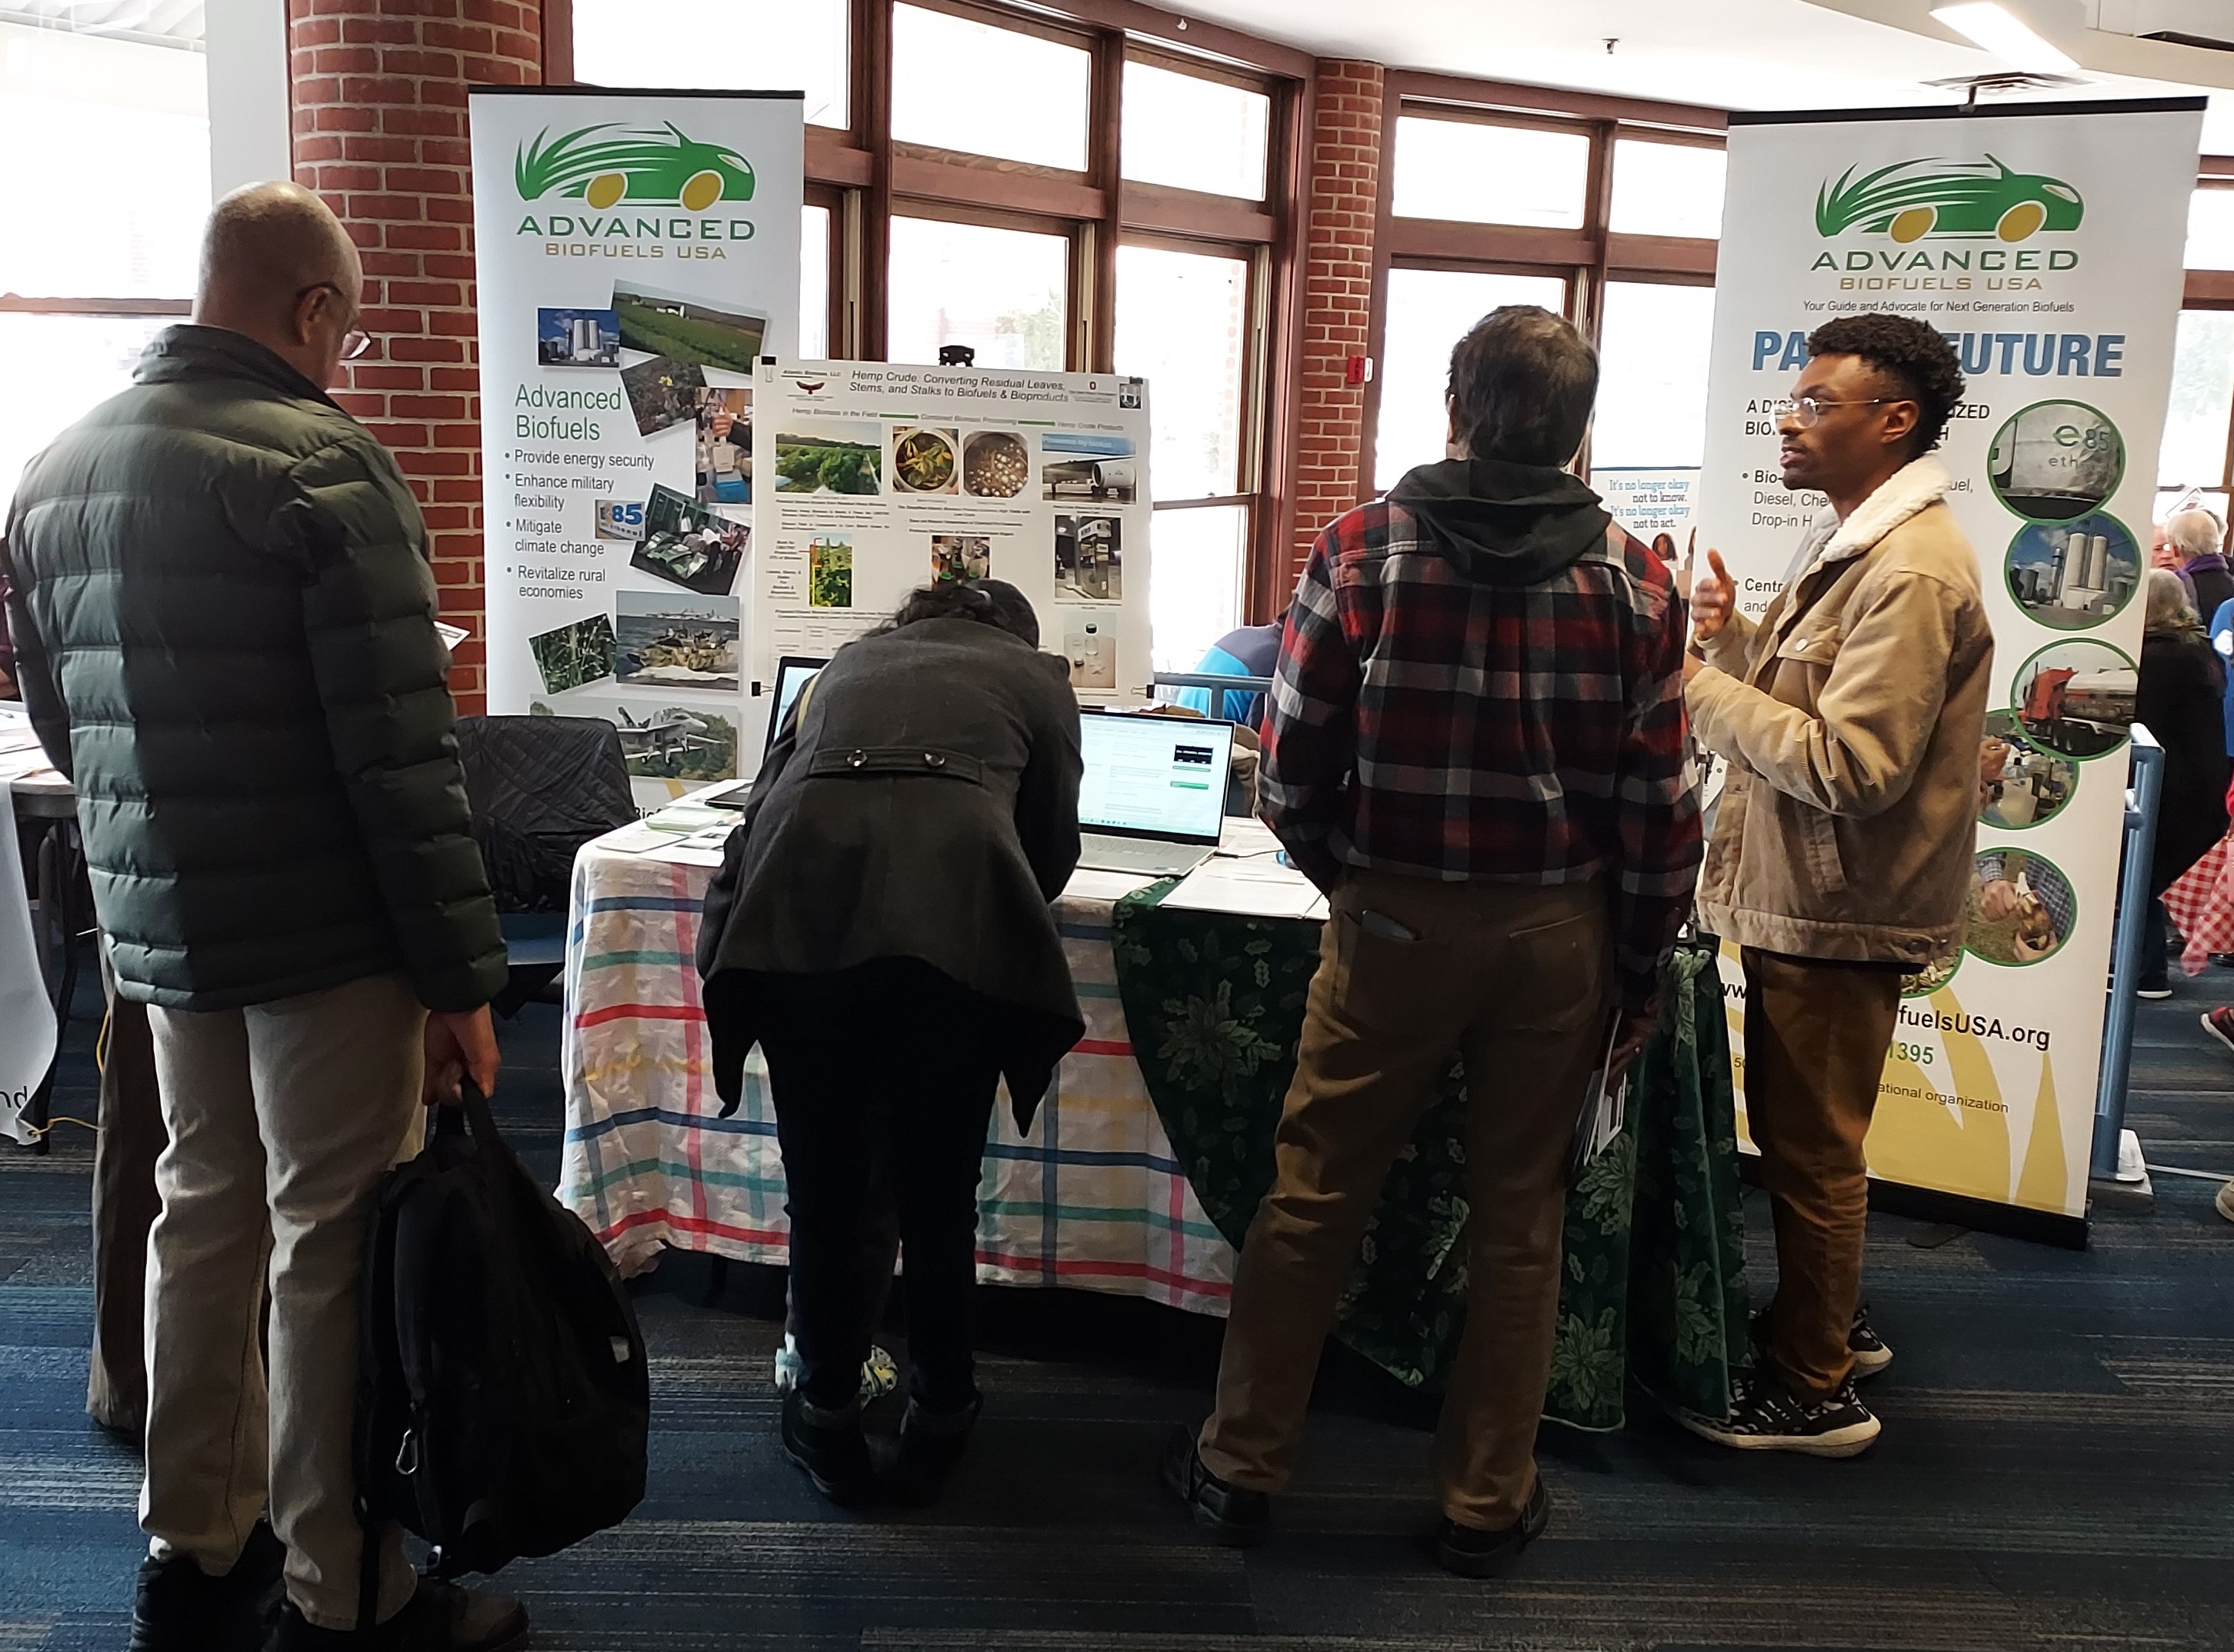 Justin McPHerson explains renewable fuels to visitors at the Advanced Biofuels USA information table at Mobilize Frederick's Climate Summit